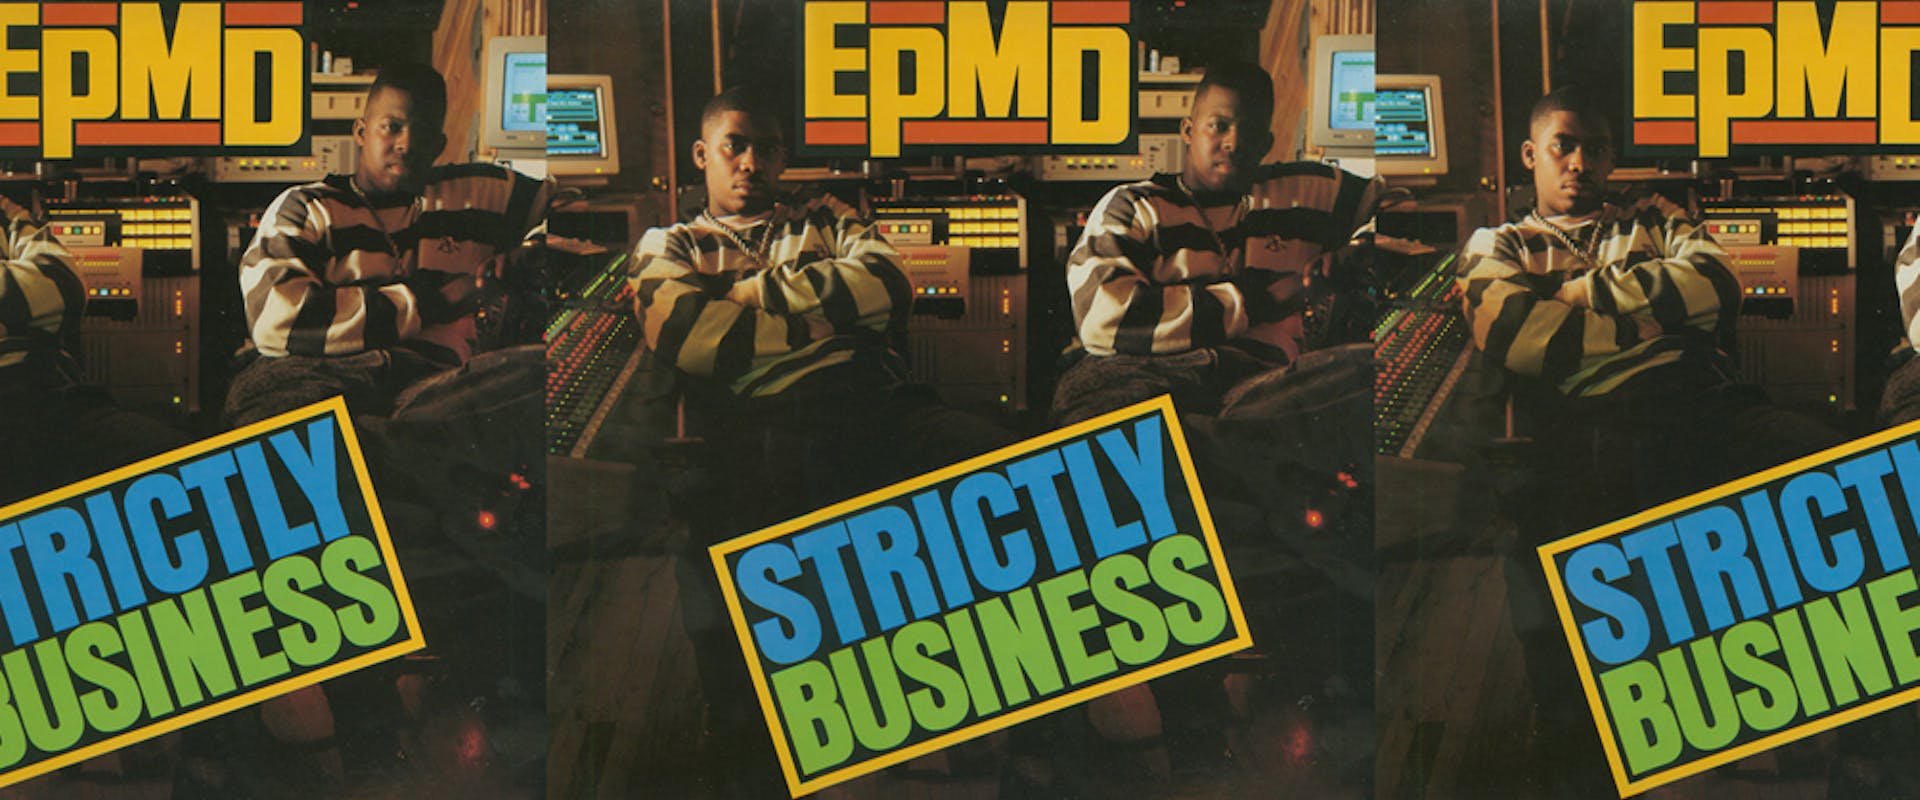 EPMD Strictly Business